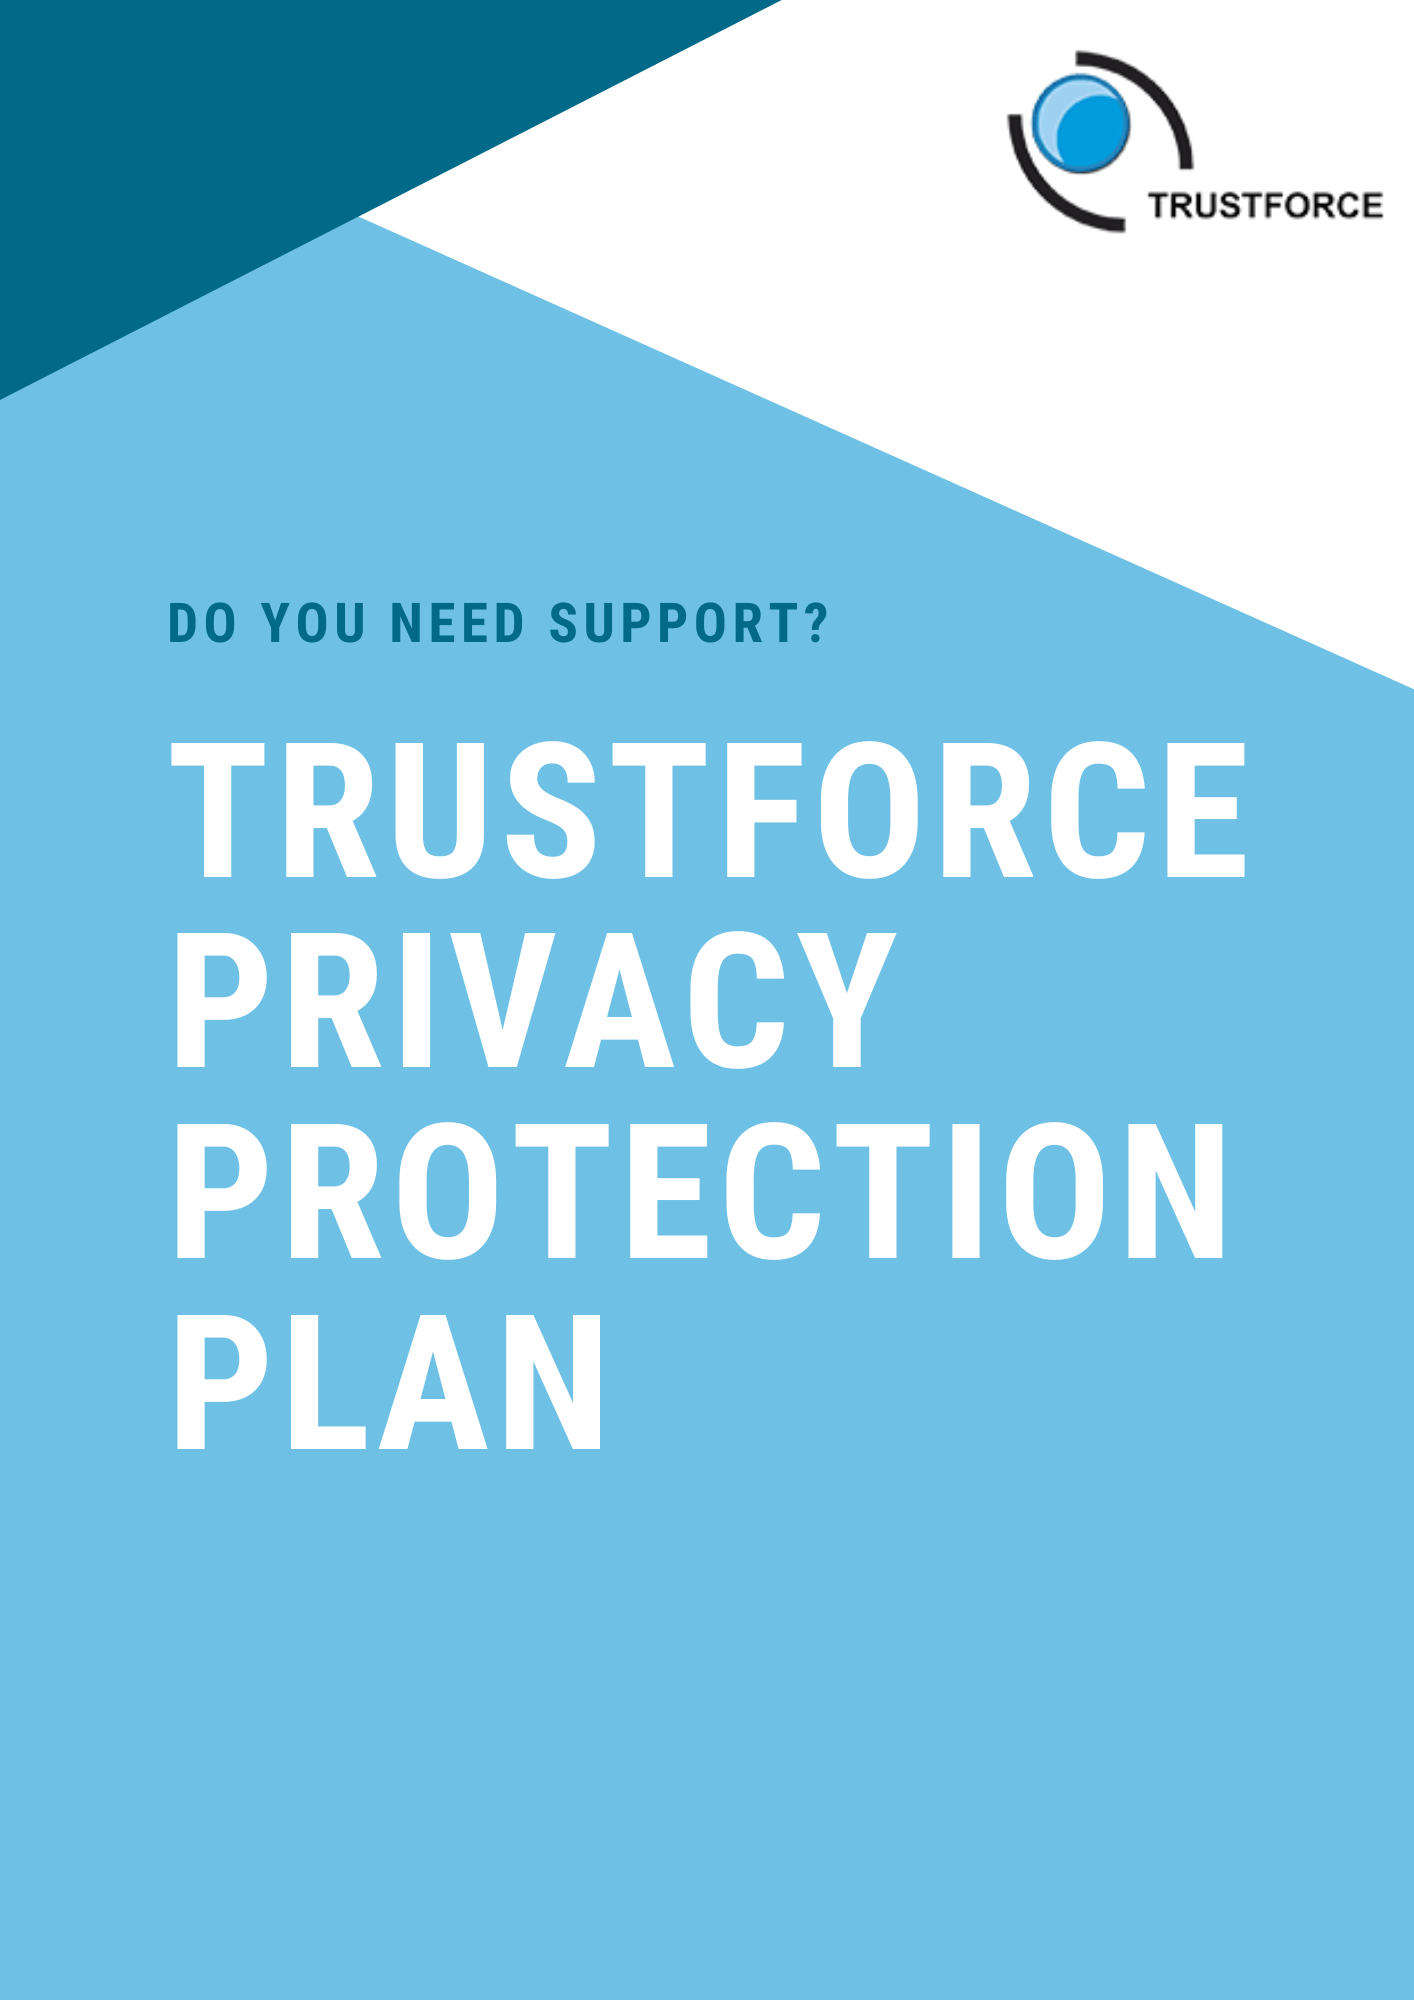 Cover from the Trustforce Privacy Protection Plan